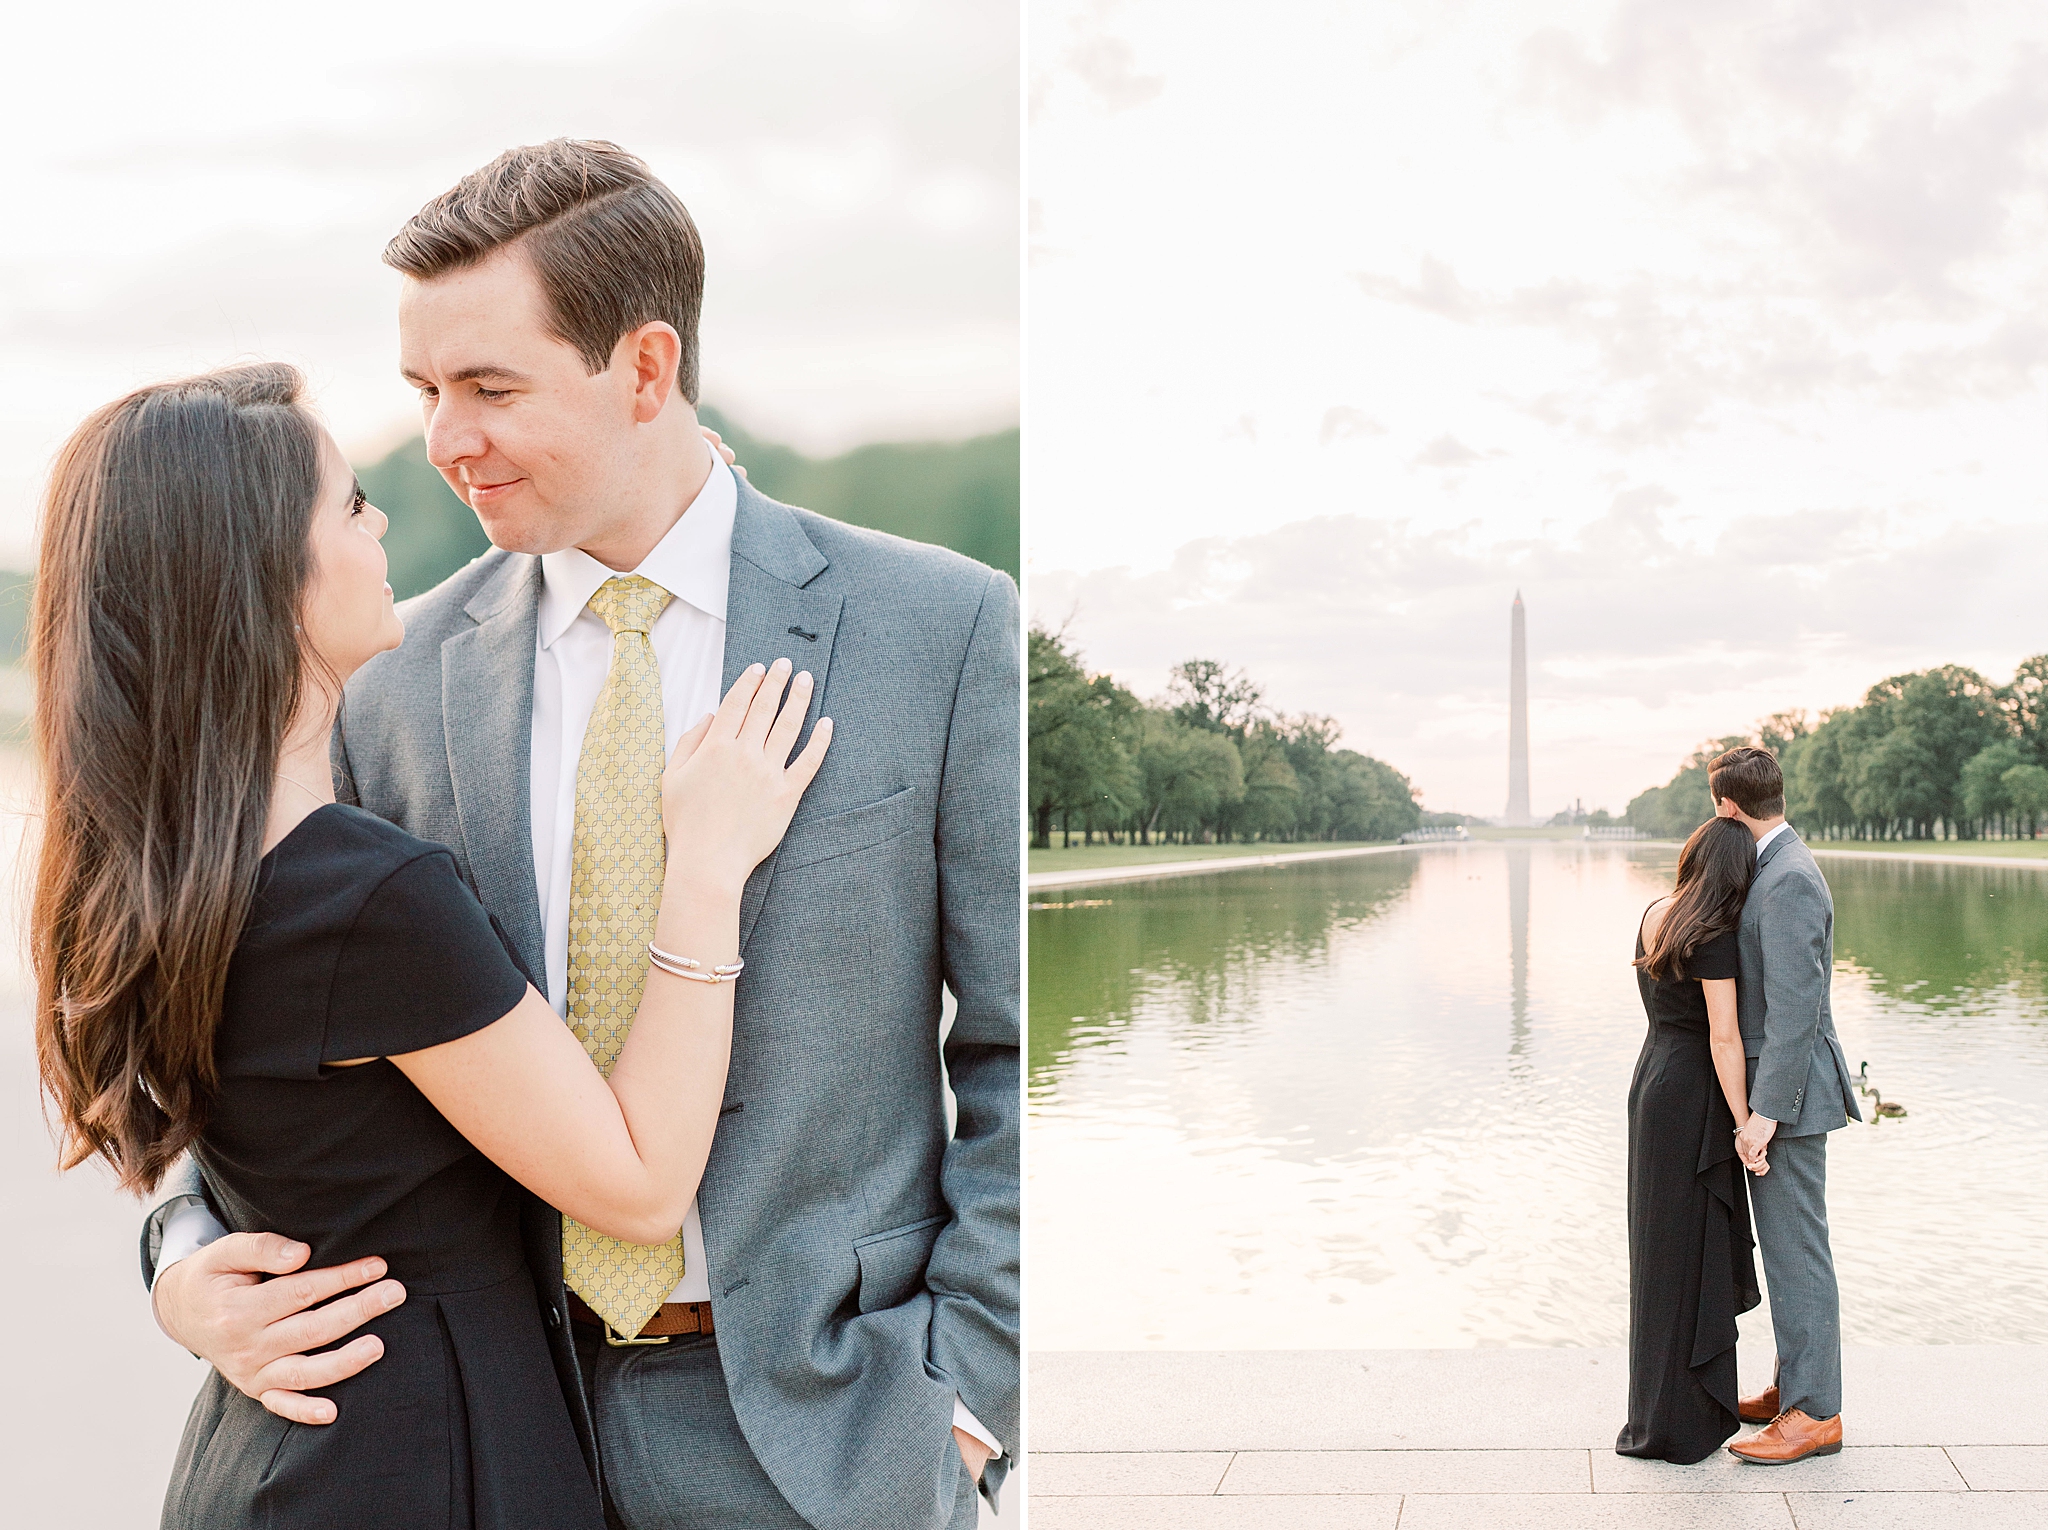 A stunning sunrise engagement session in Washington, DC at locations including the Lincoln Memorial, Constitution Gardens, and DC War Memorial.